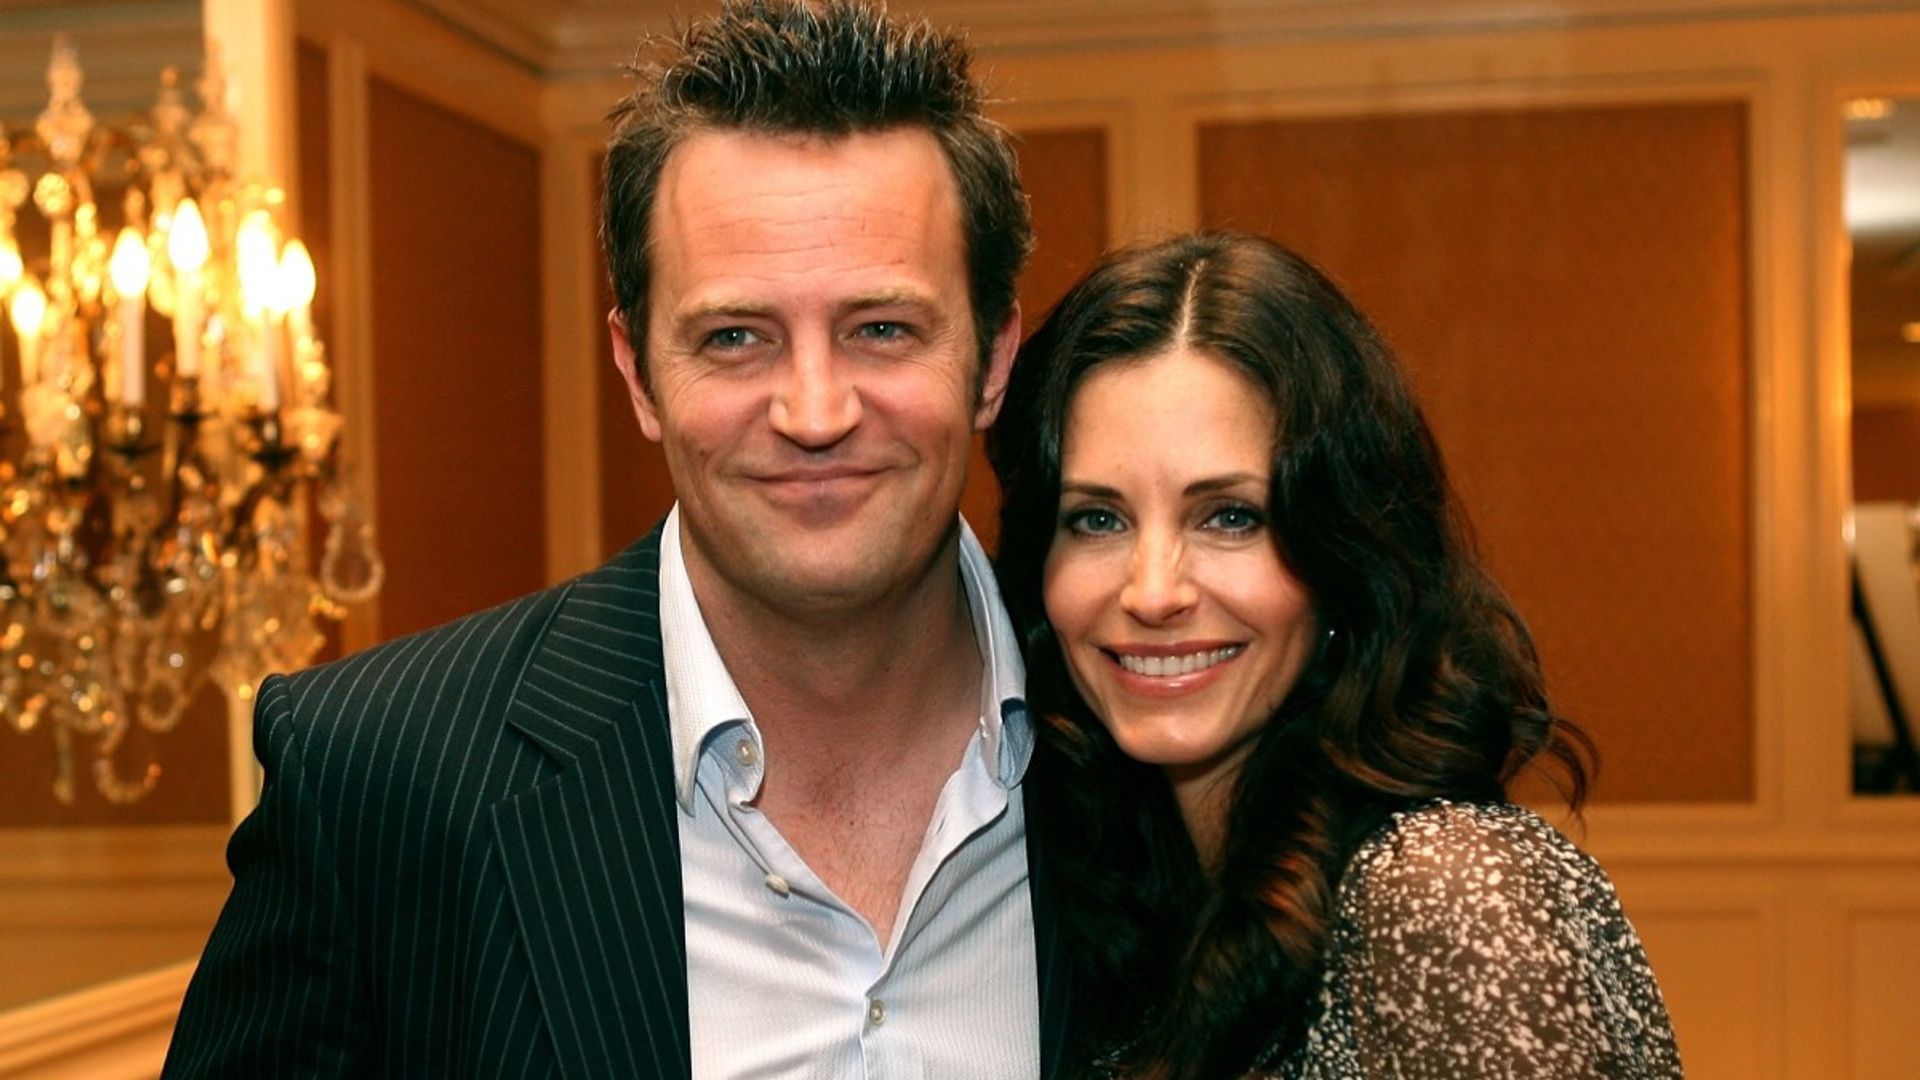 Courteney Cox pays tribute to Matthew Perry with heartfelt birthday message